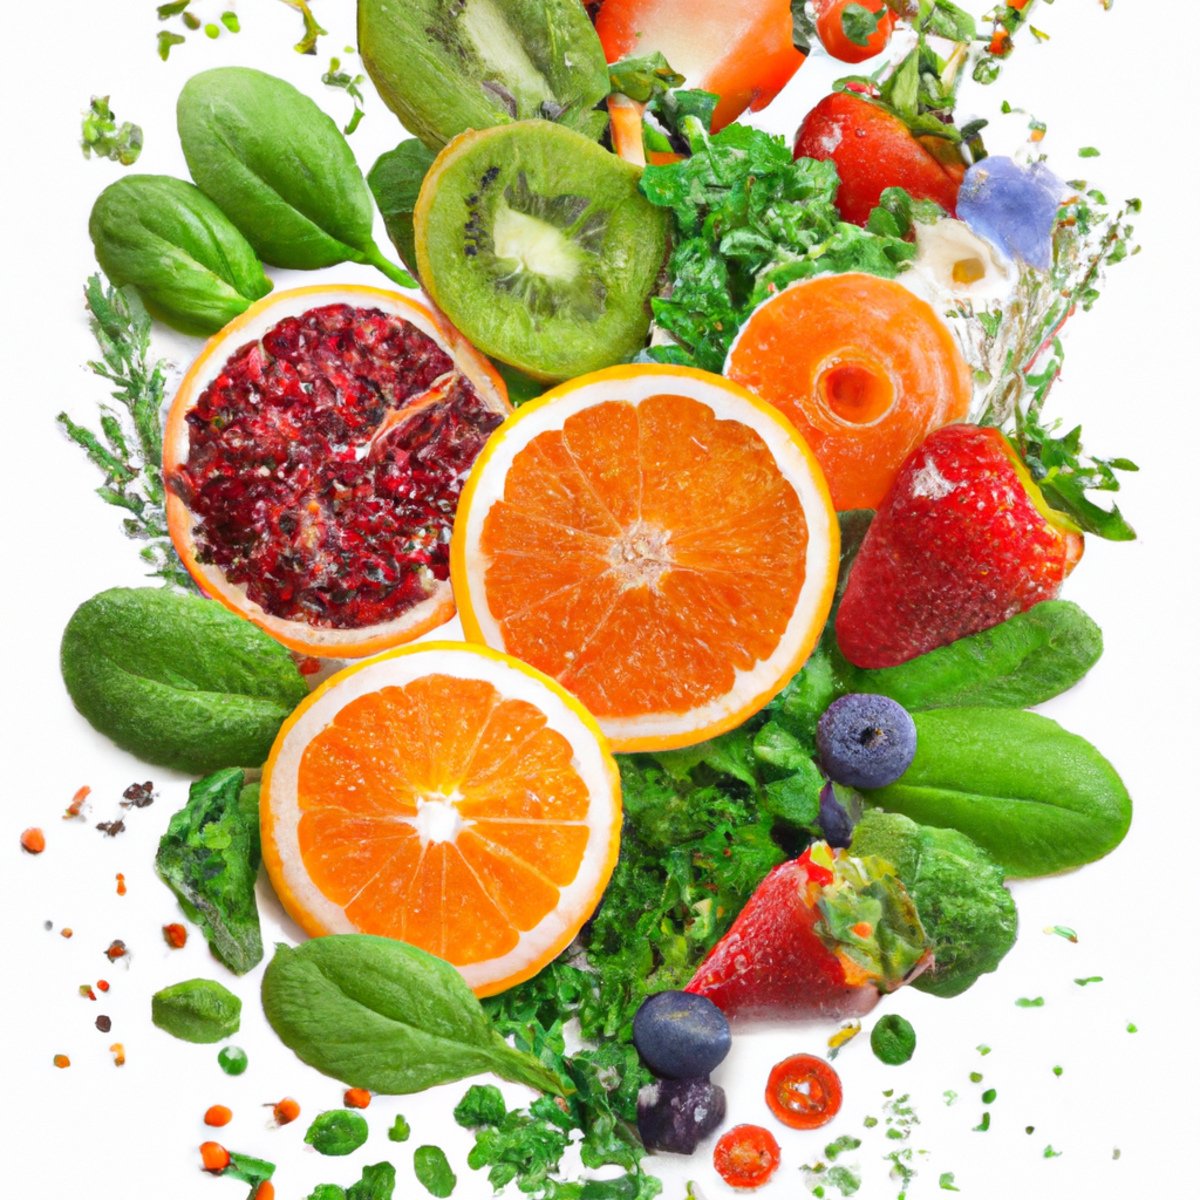 Clean beauty - A vibrant composition of fresh fruits, vegetables, and superfoods on a rustic wooden table, emphasizing the connection between nutrition and skin radiance.